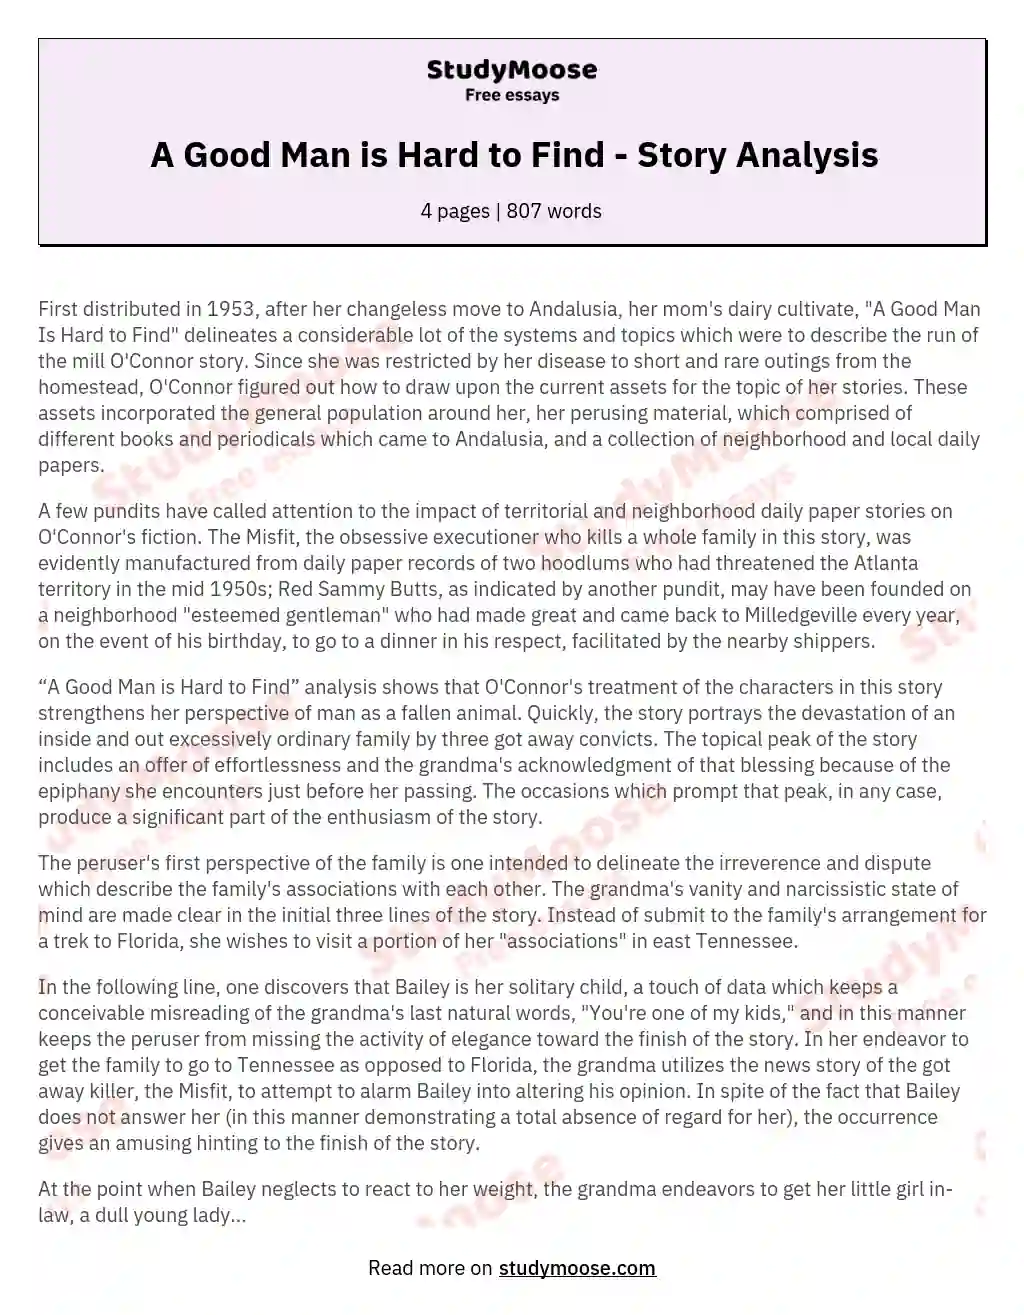 A Good Man is Hard to Find - Story Analysis essay